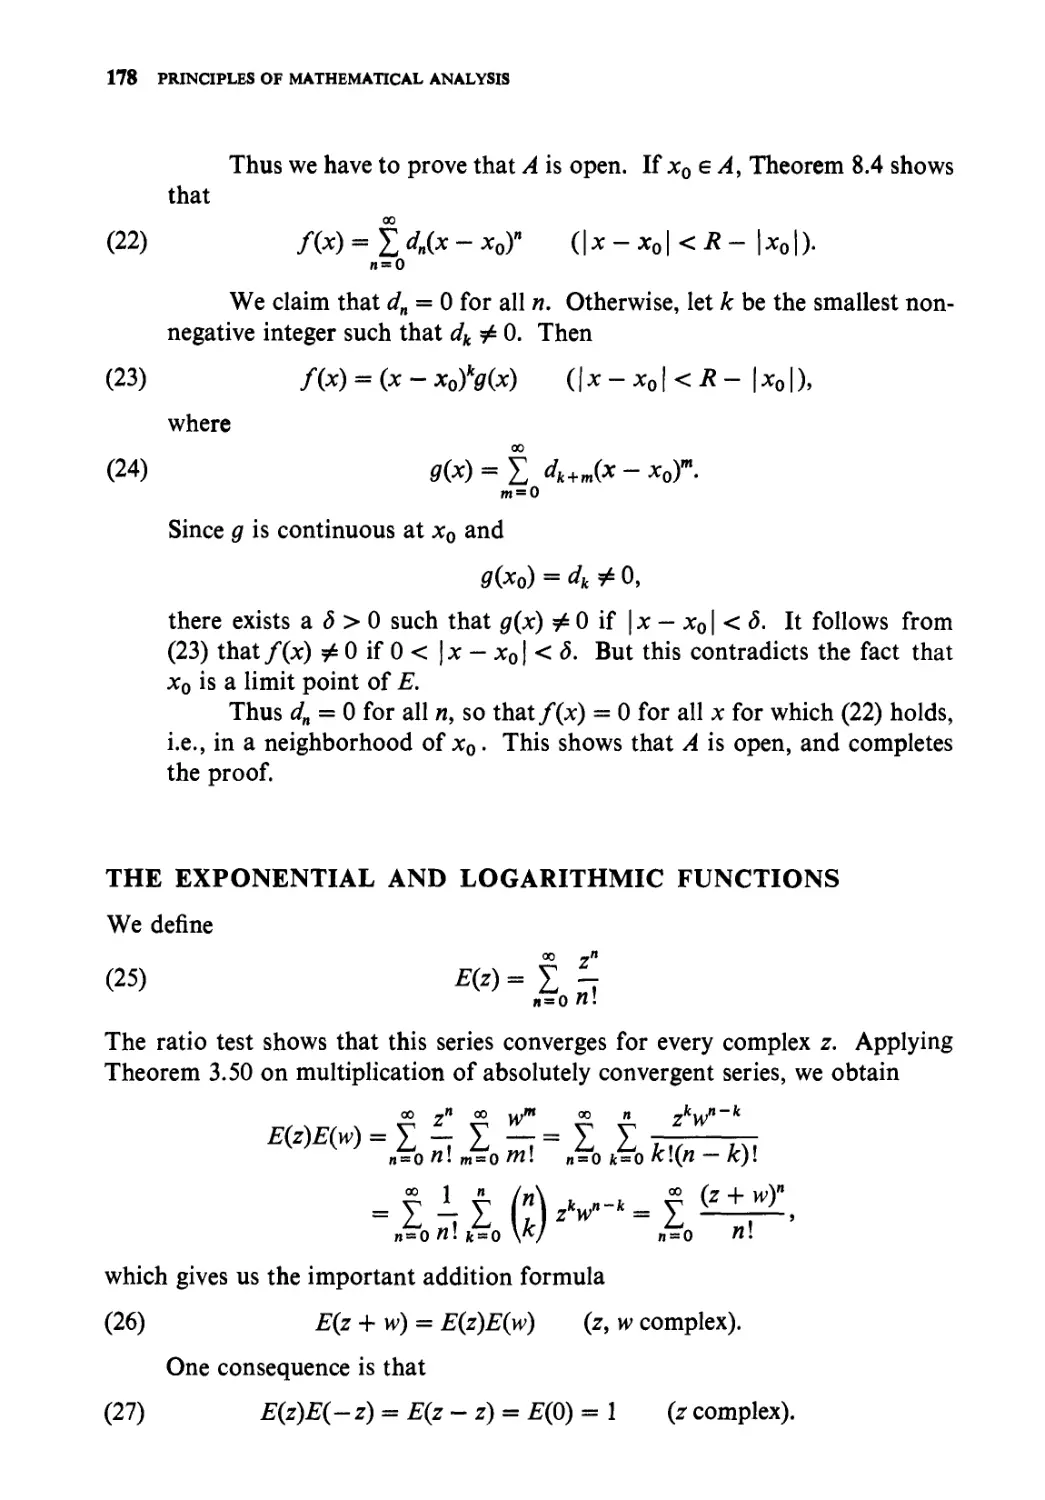 The exponential and logarithmic functions